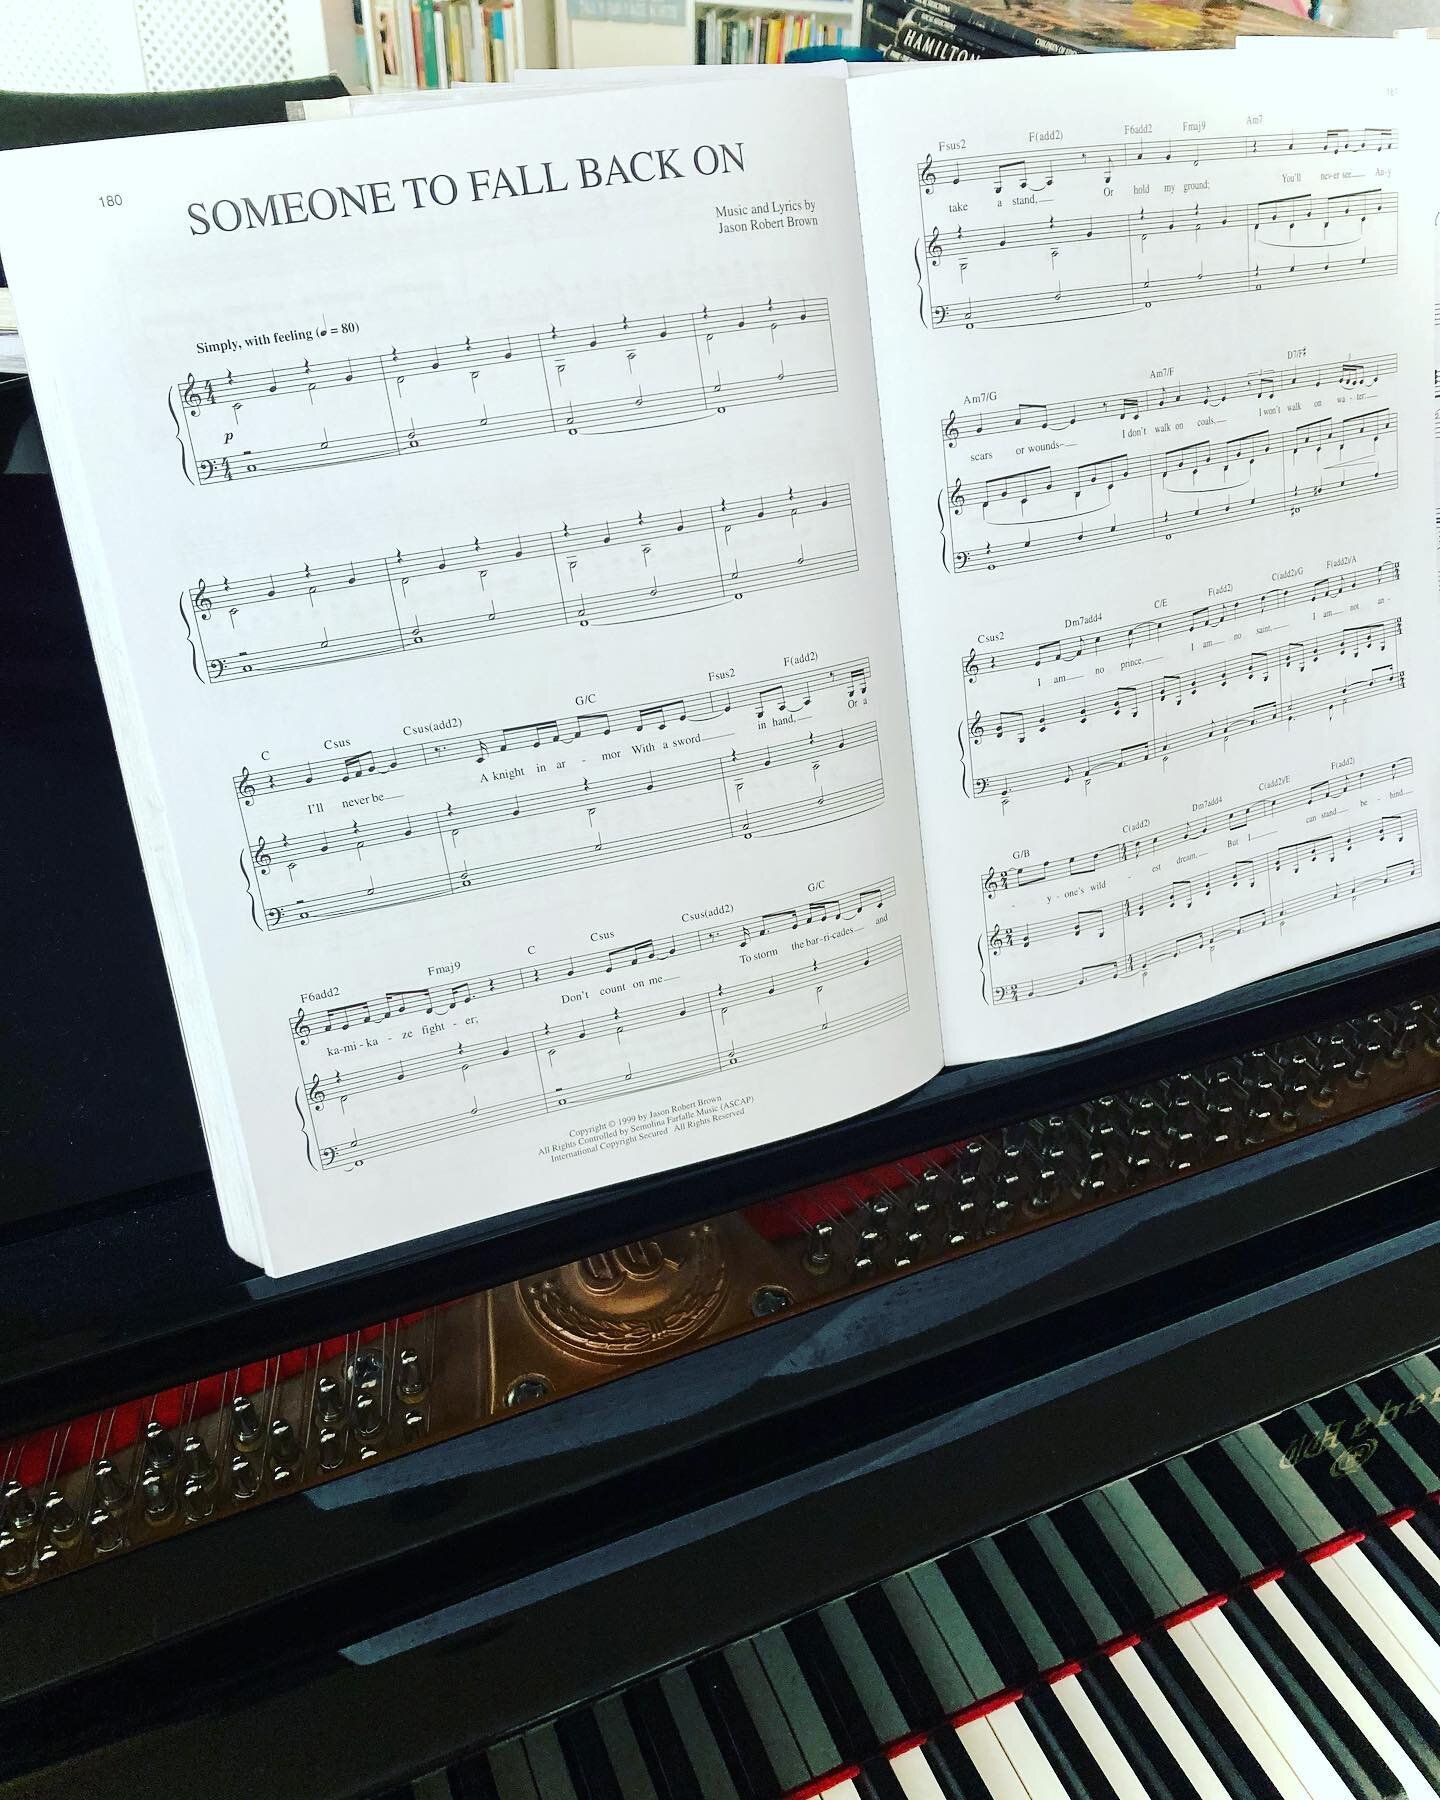 Such a pleasure to work on material like this with a client today 🙌💜🎶 Jason Robert Brown rocks!! I LOVE my job ❤️ #jasonrobertbrown #musicaltheatre #singinglessons